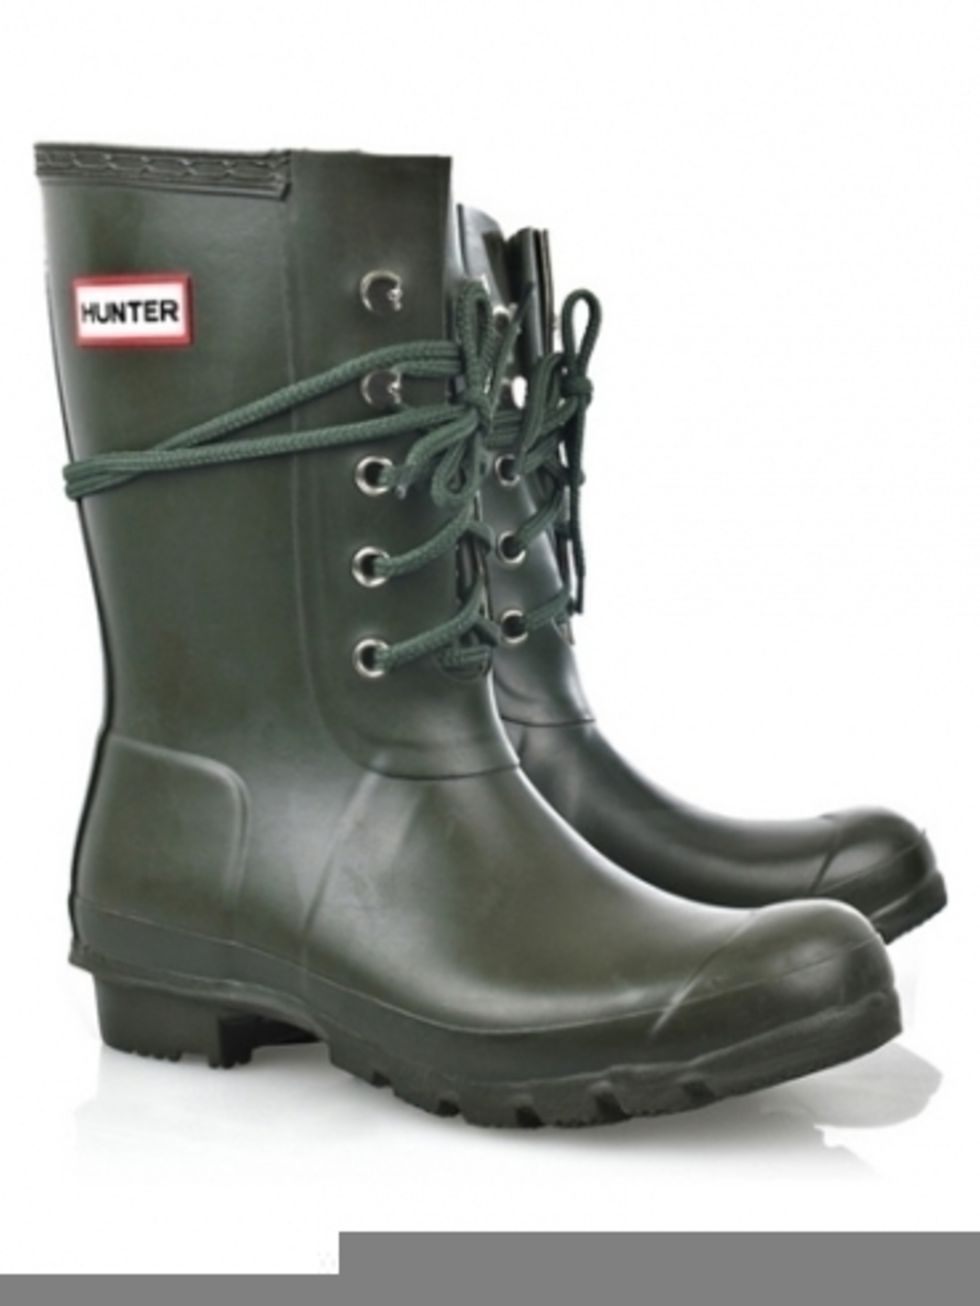 Footwear, Boot, Black, Leather, Work boots, Steel-toe boot, Motorcycle boot, Synthetic rubber, 